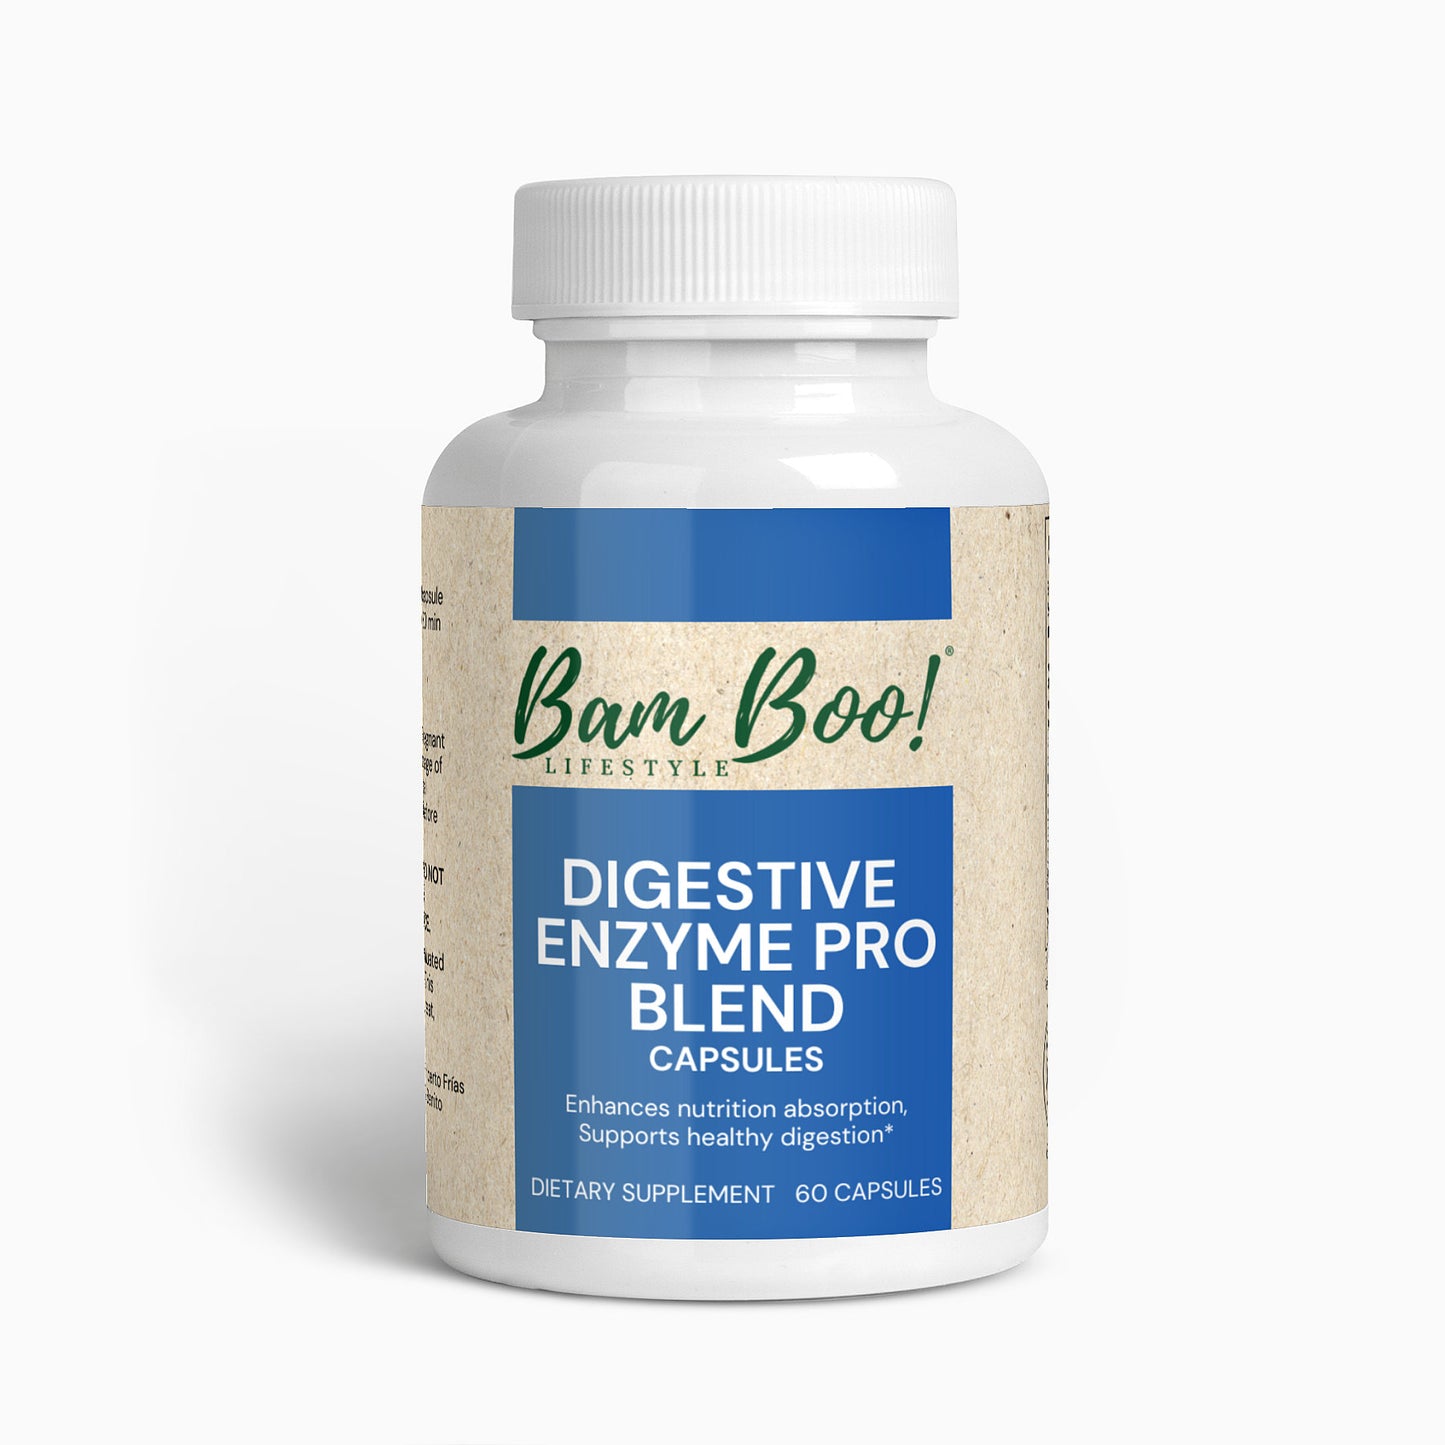 Digestive Enzyme Pro Blend 60 Capsules Bam Boo! Lifestyle Vitamins & Supplements